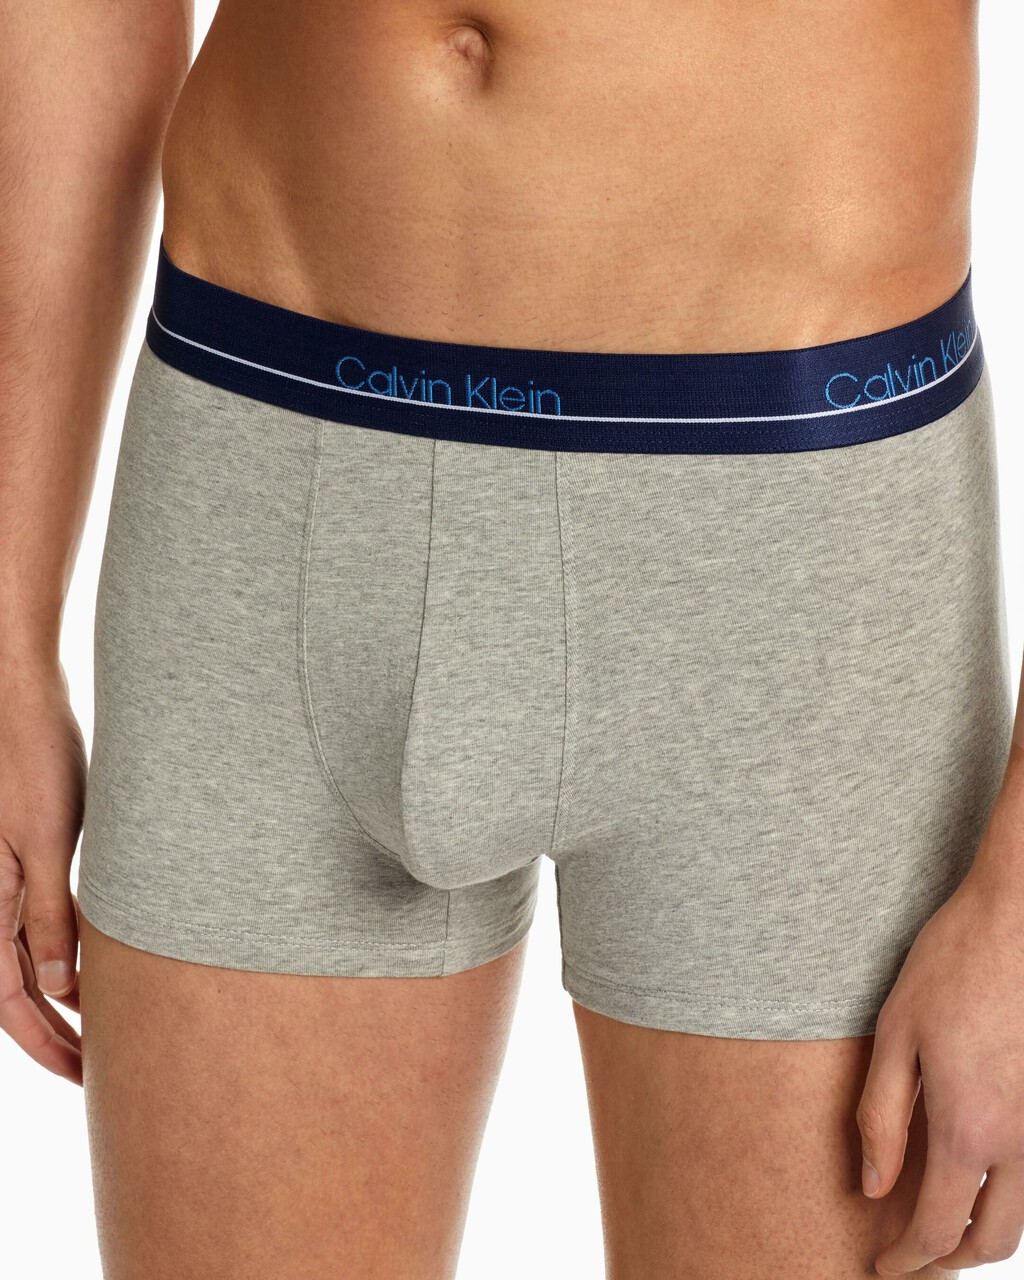 COTTON STRETCH LIMITED EDITION TRUNK 3 PACK